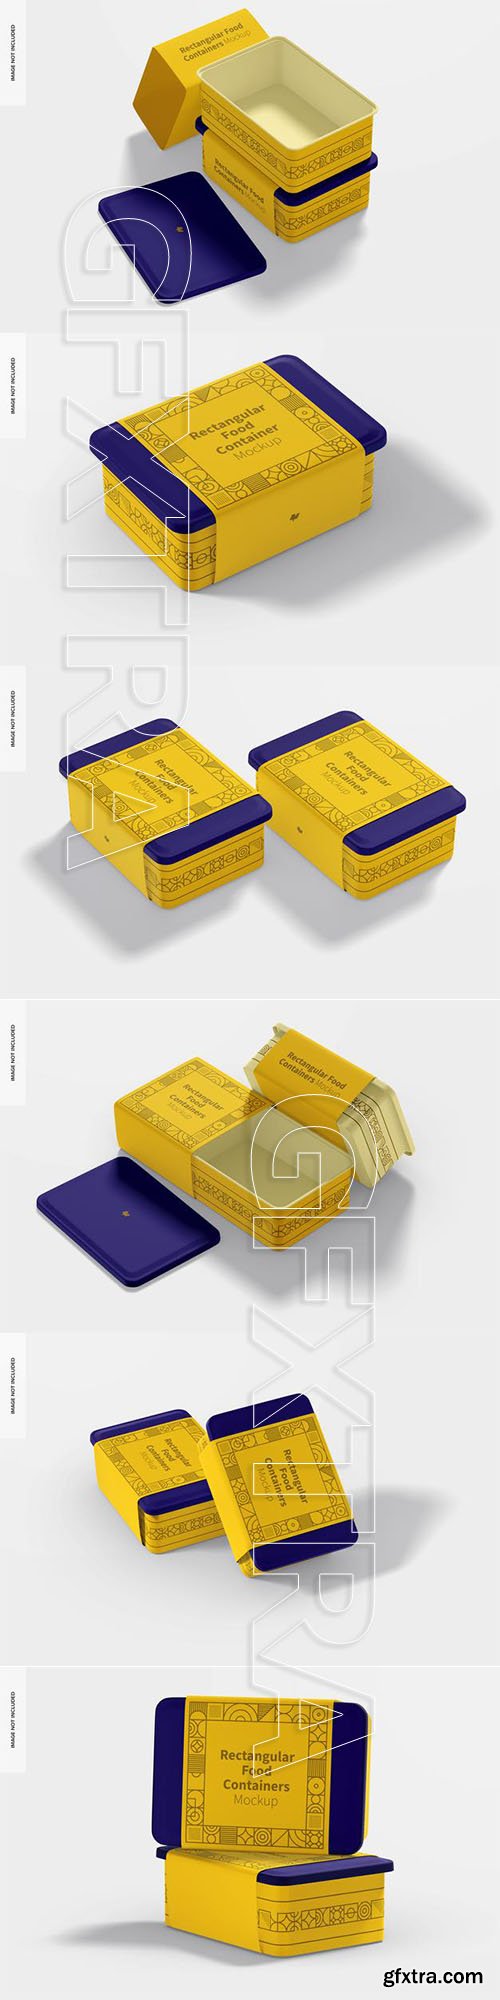 Rectangular plastic food delivery containers mockup